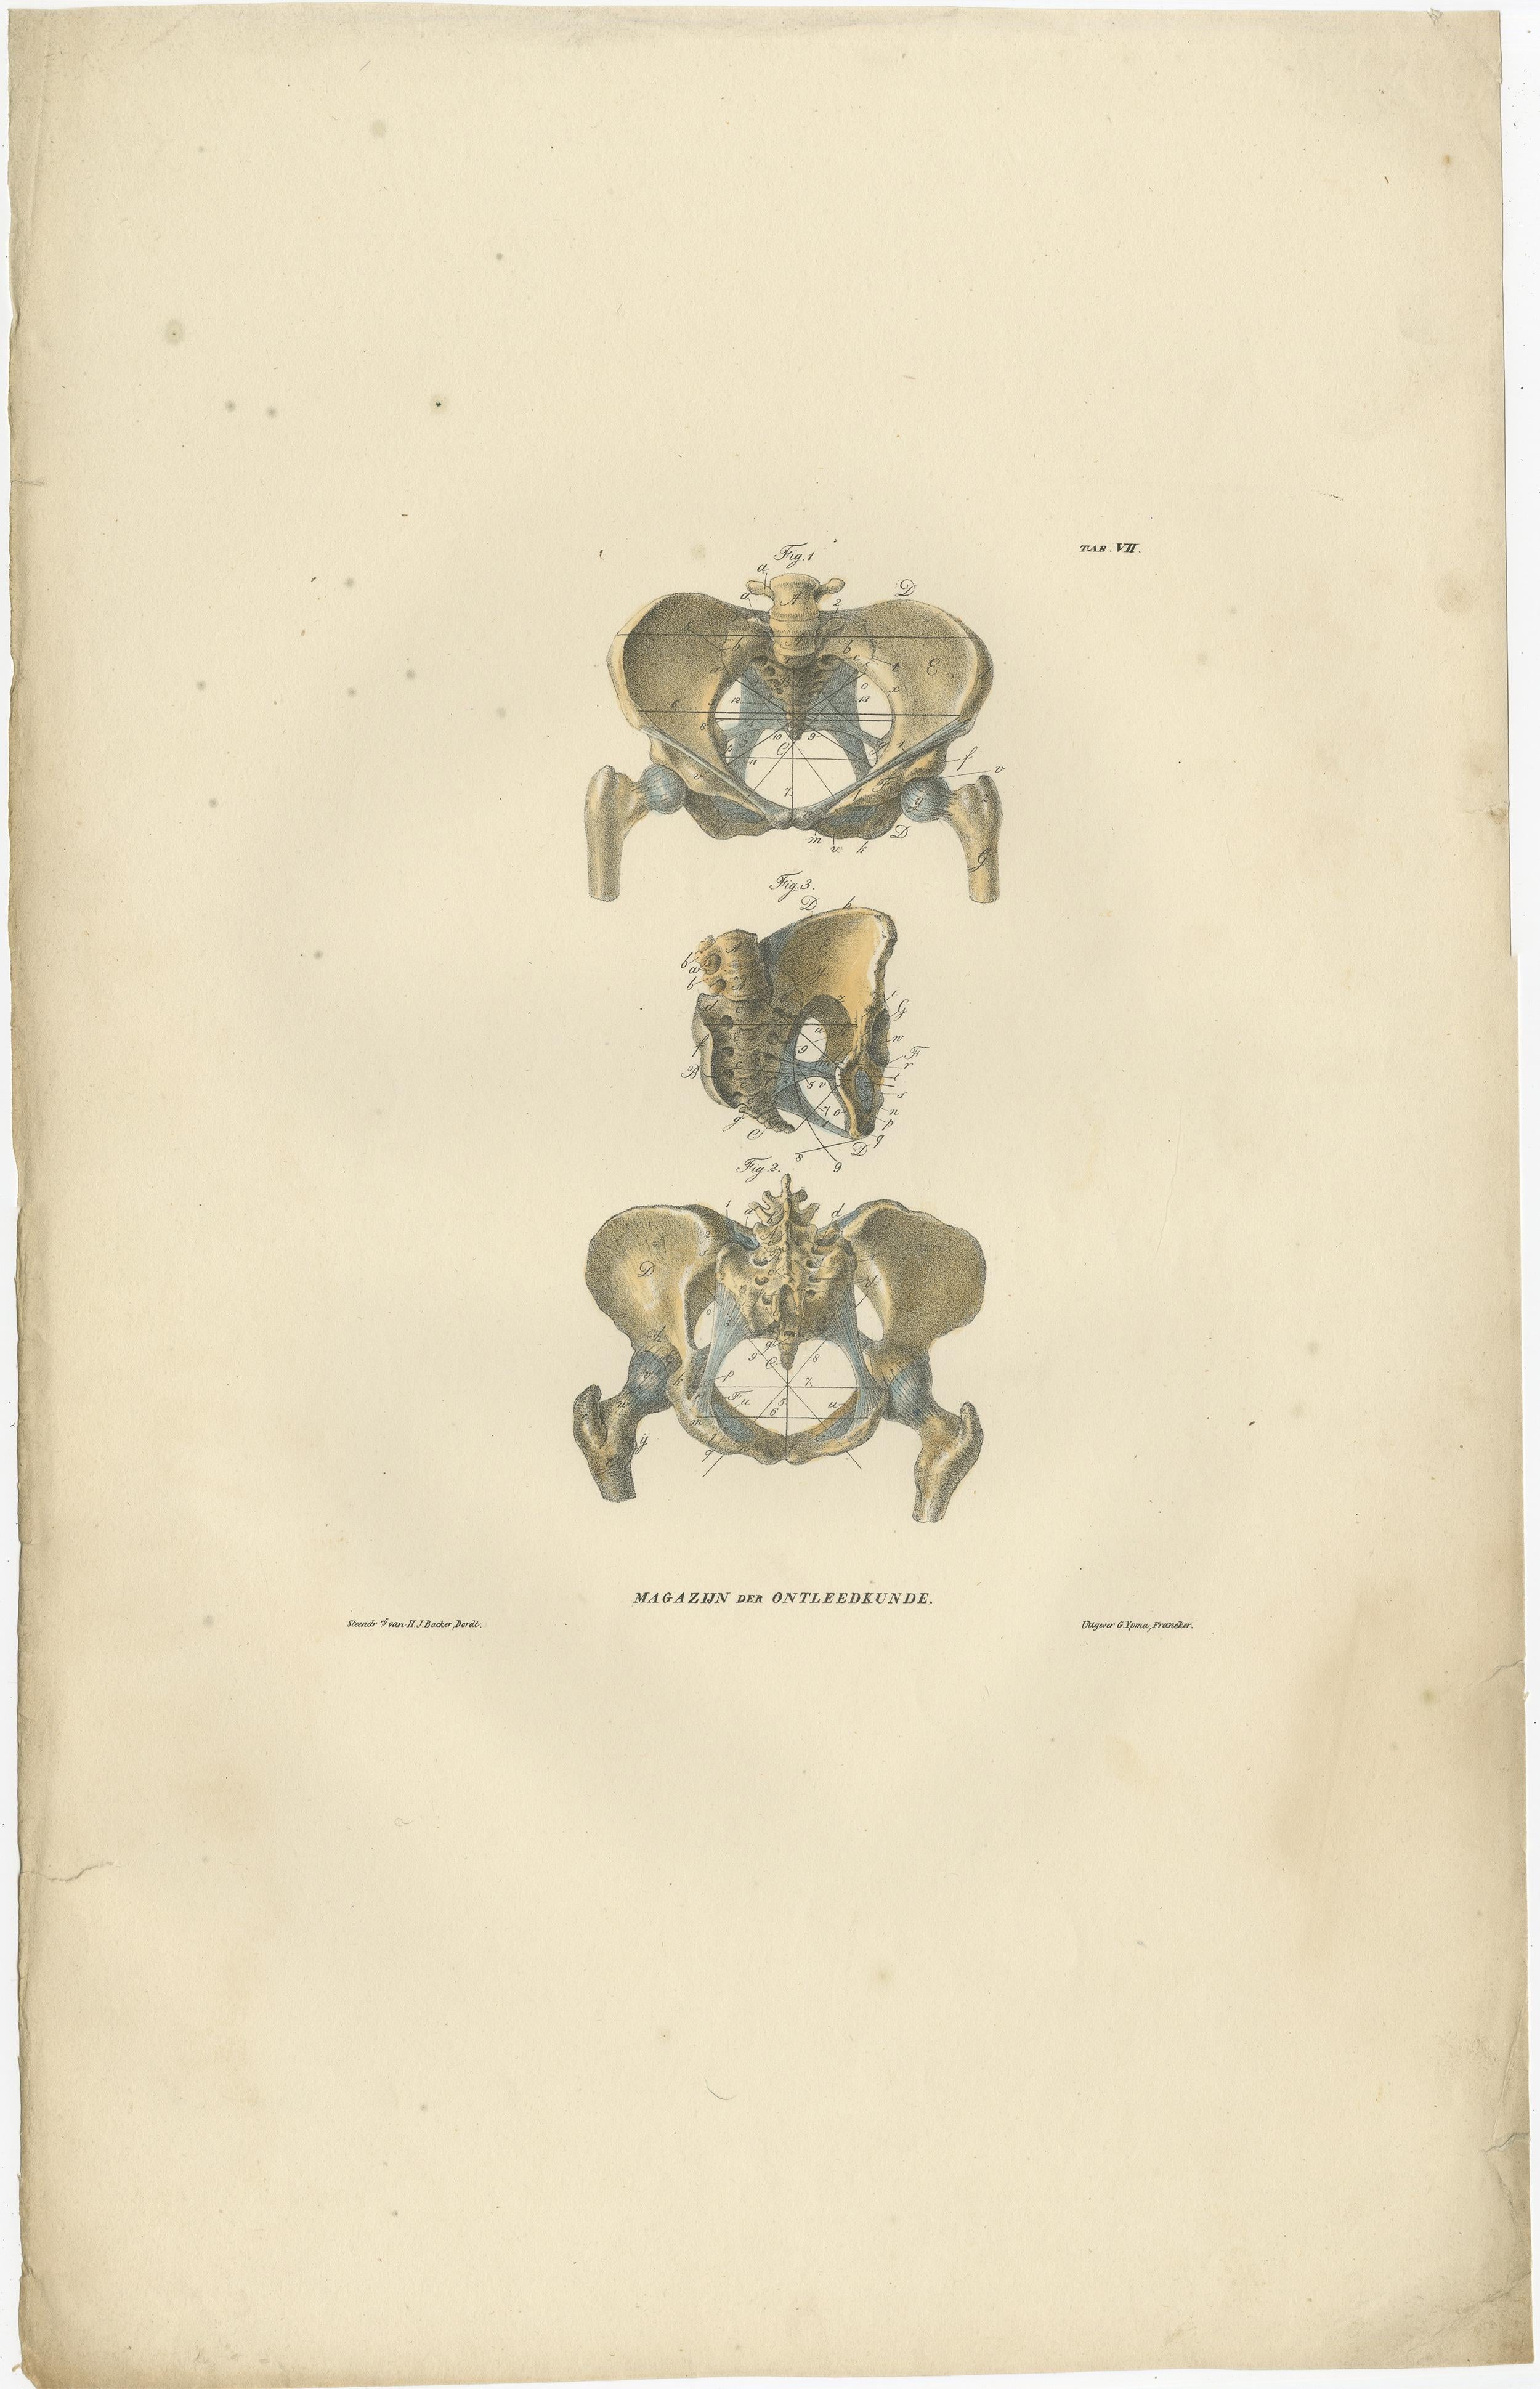 Set of 12 antique anatomy prints of osteology, the scientific study of bones, practiced by osteologists. These prints originate from 'Magazijn van ontleedkunde' by Dr. Th. Richter. Published 1839.